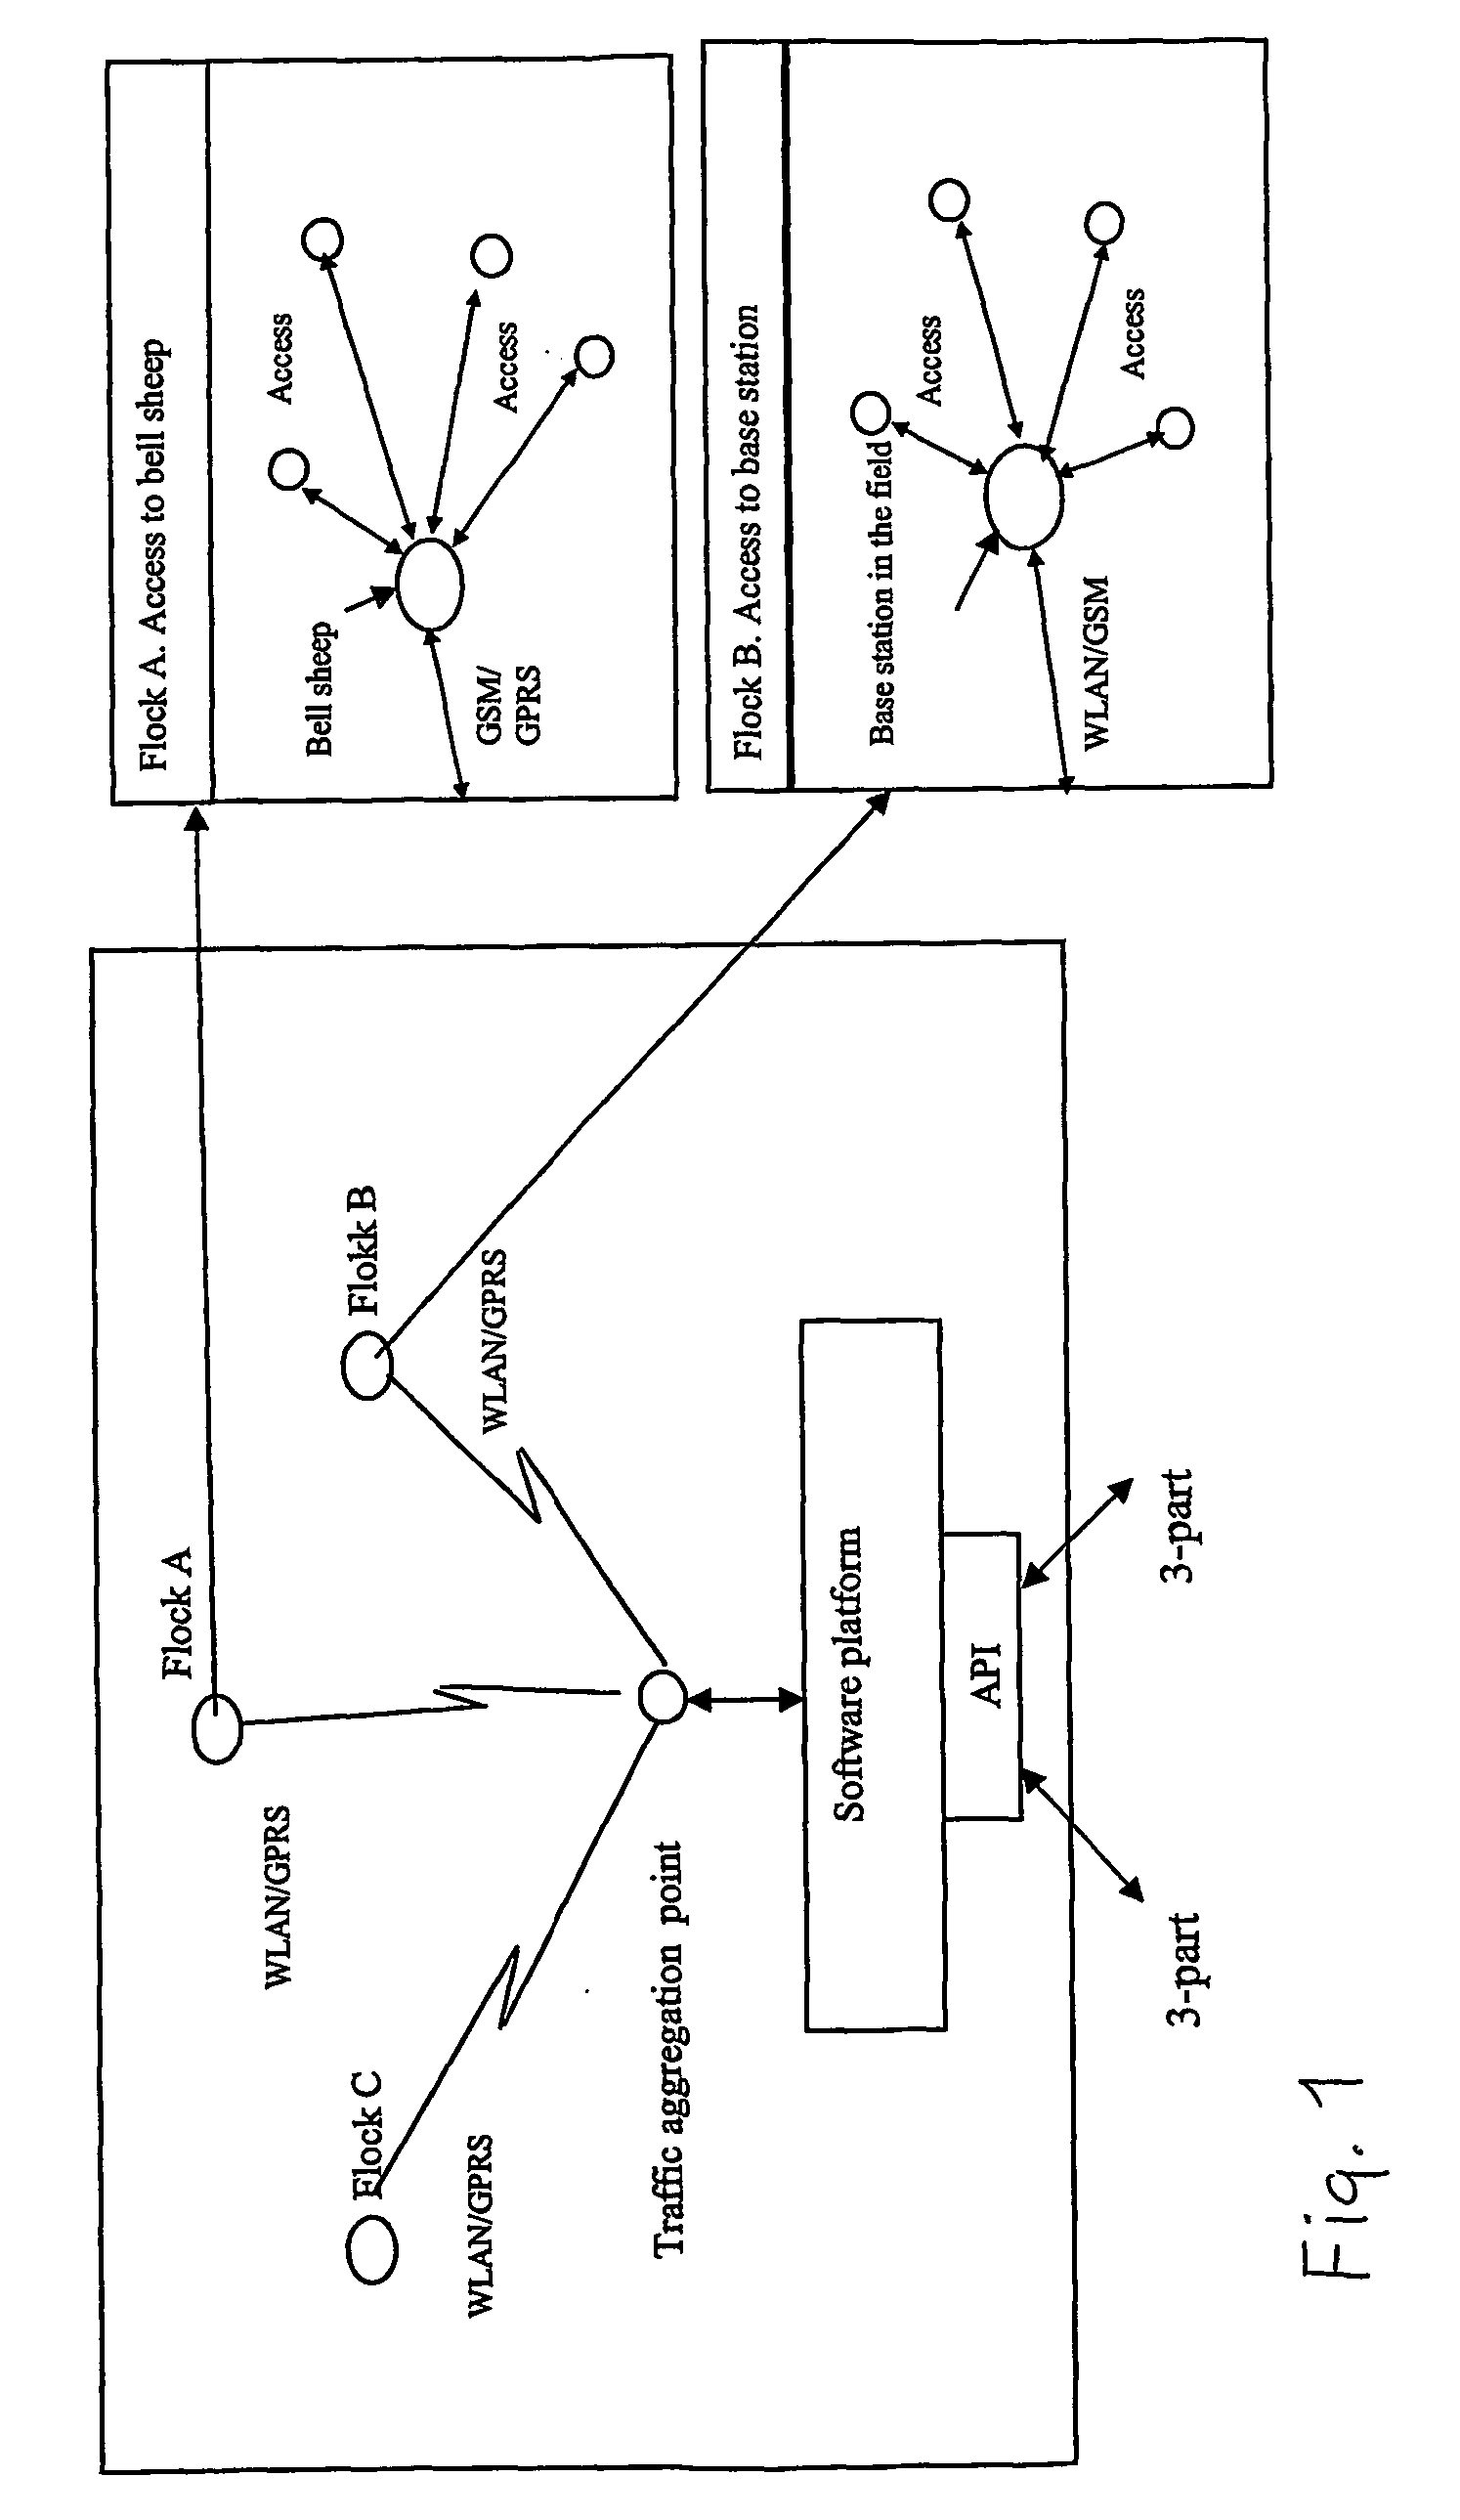 System and method for tracking individuals